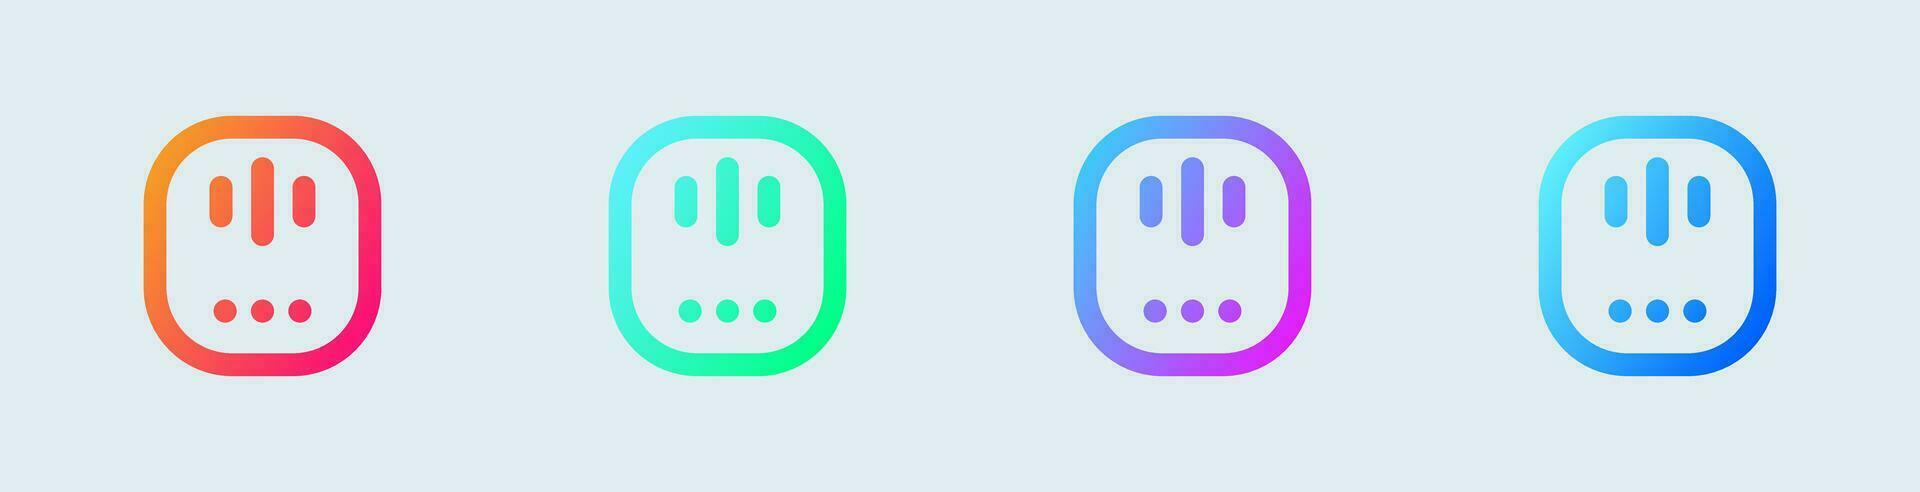 Voice assistant line icon in gradient colors. Smart talk signs vector illustration.